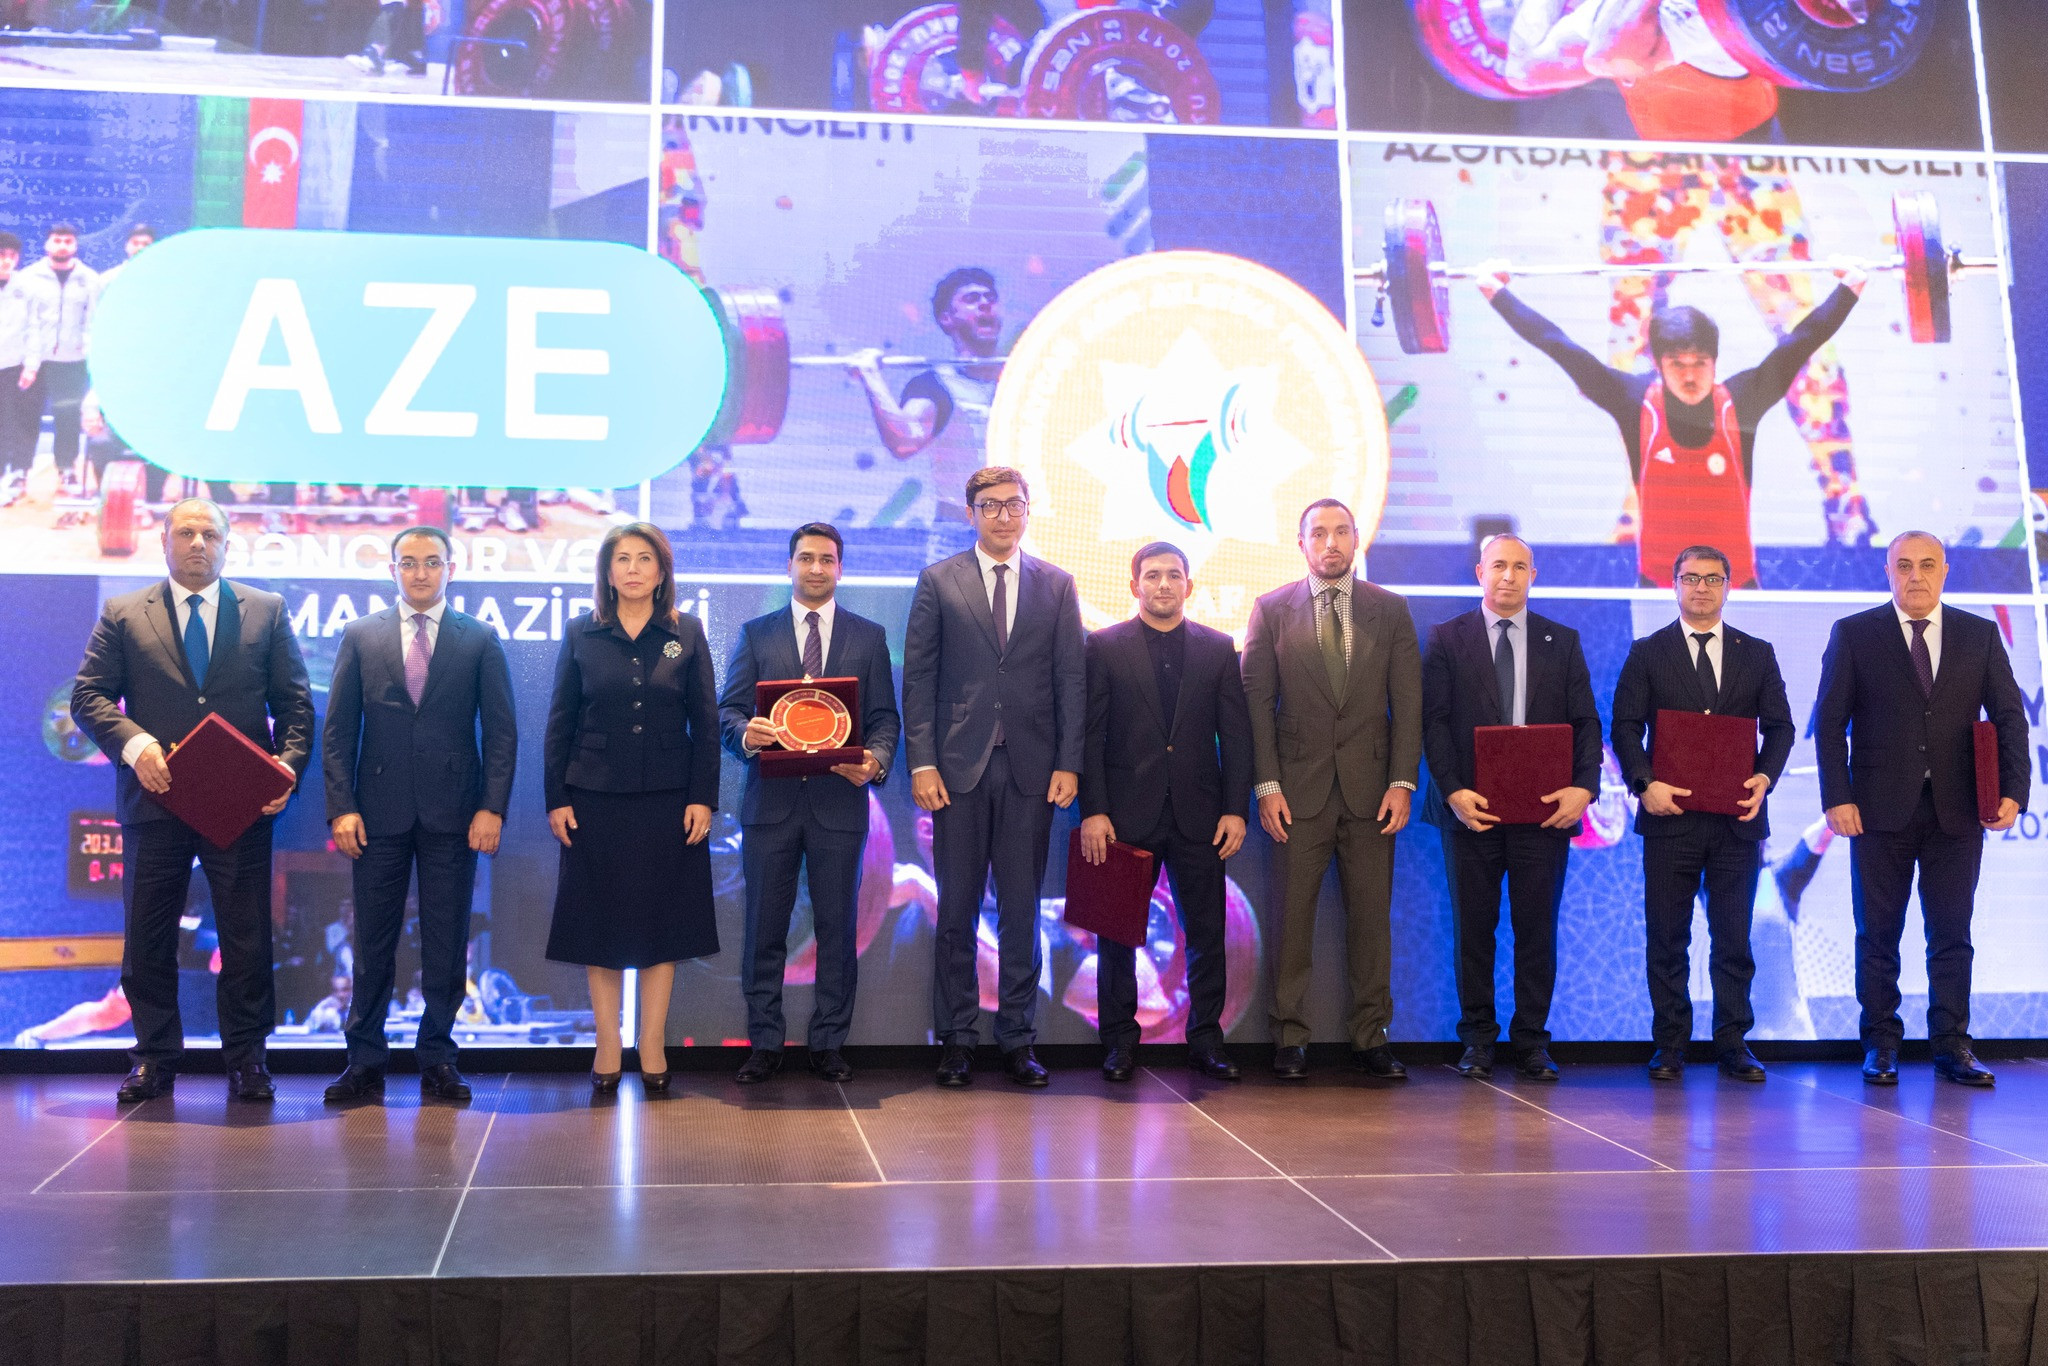 The Azerbaijan Weightlifting Federation hopes to strengthen the material and technical base of weightlifting in the country ©EWF/Azerbaijan Weightlifting Federation